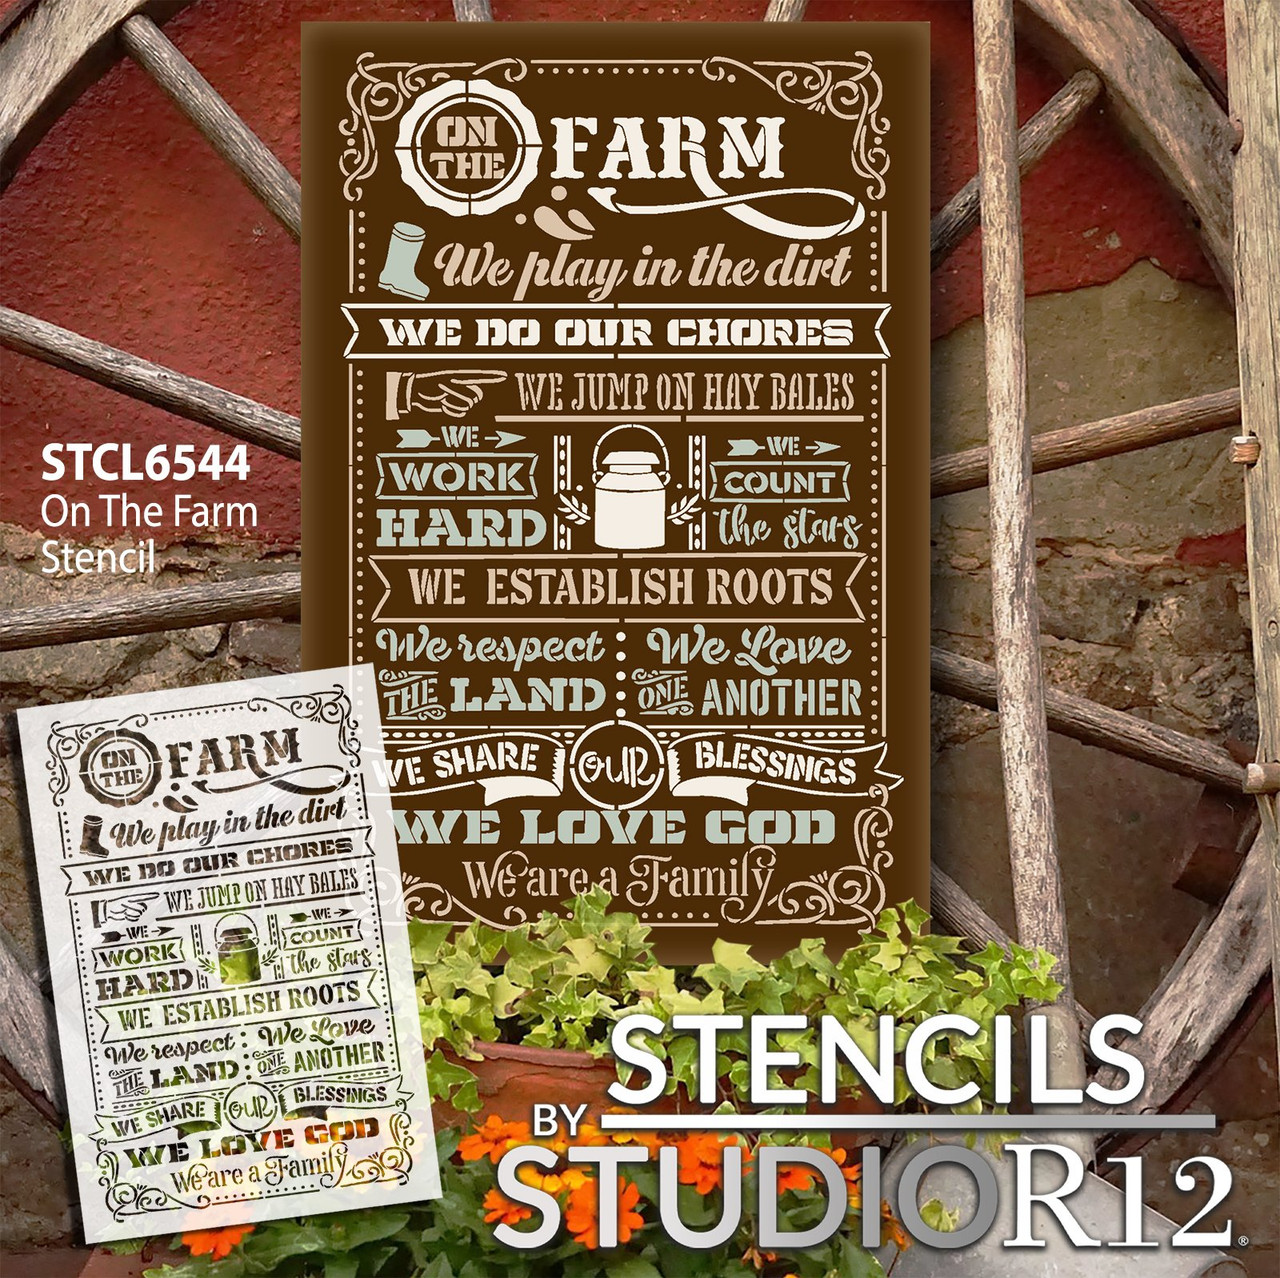 On The Farm Stencil by StudioR12 - Select Size - USA Made - Craft DIY Farmhouse Country Home Decor | Paint Family Wood Sign | Reusable Mylar Template